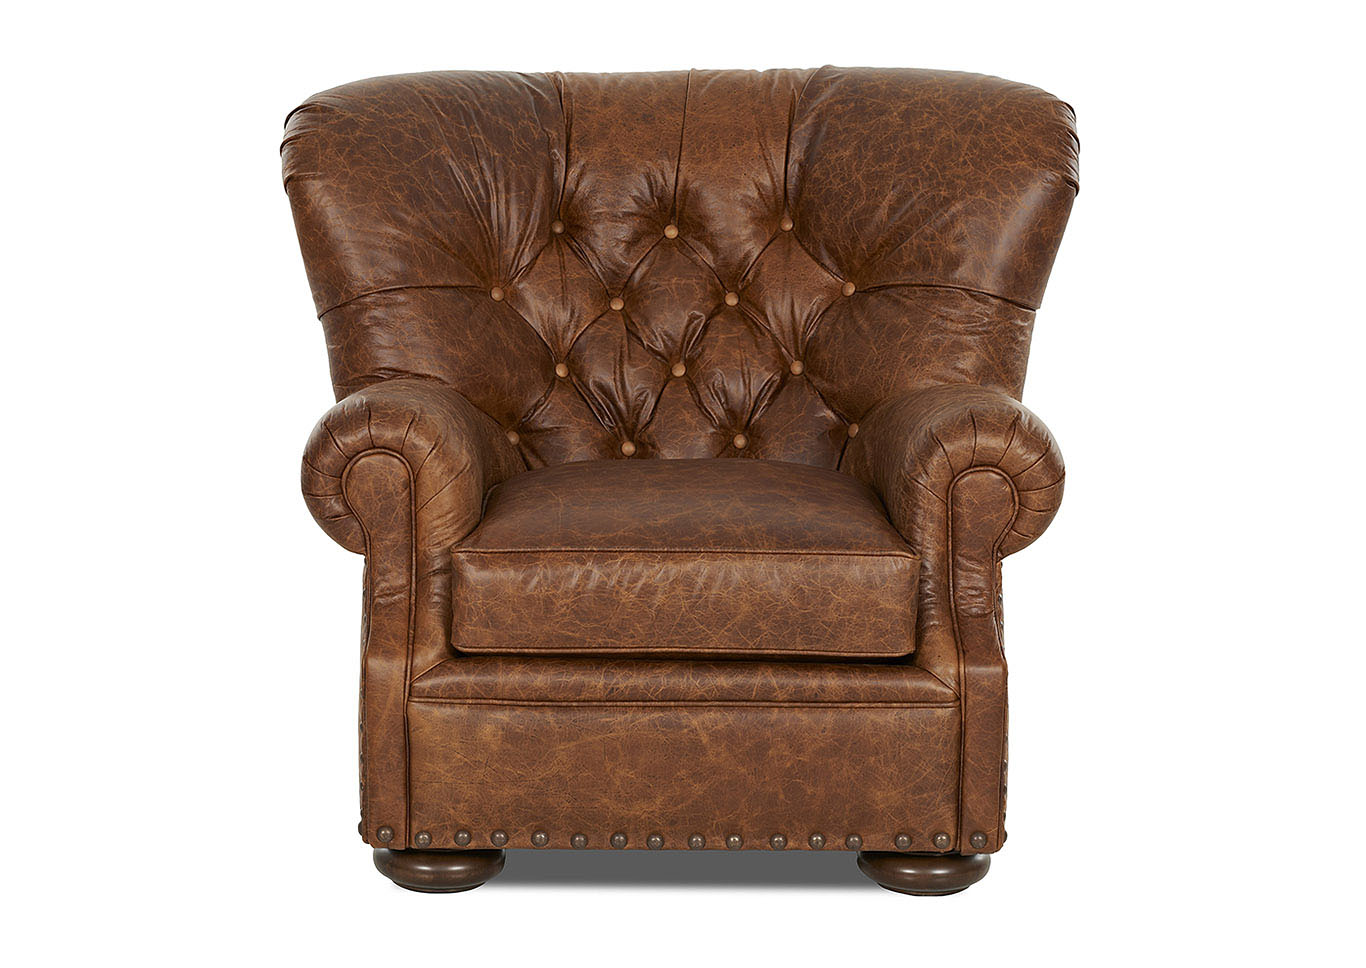 Aspen Chaps Saddle Stationary Leather Chair,Klaussner Home Furnishings